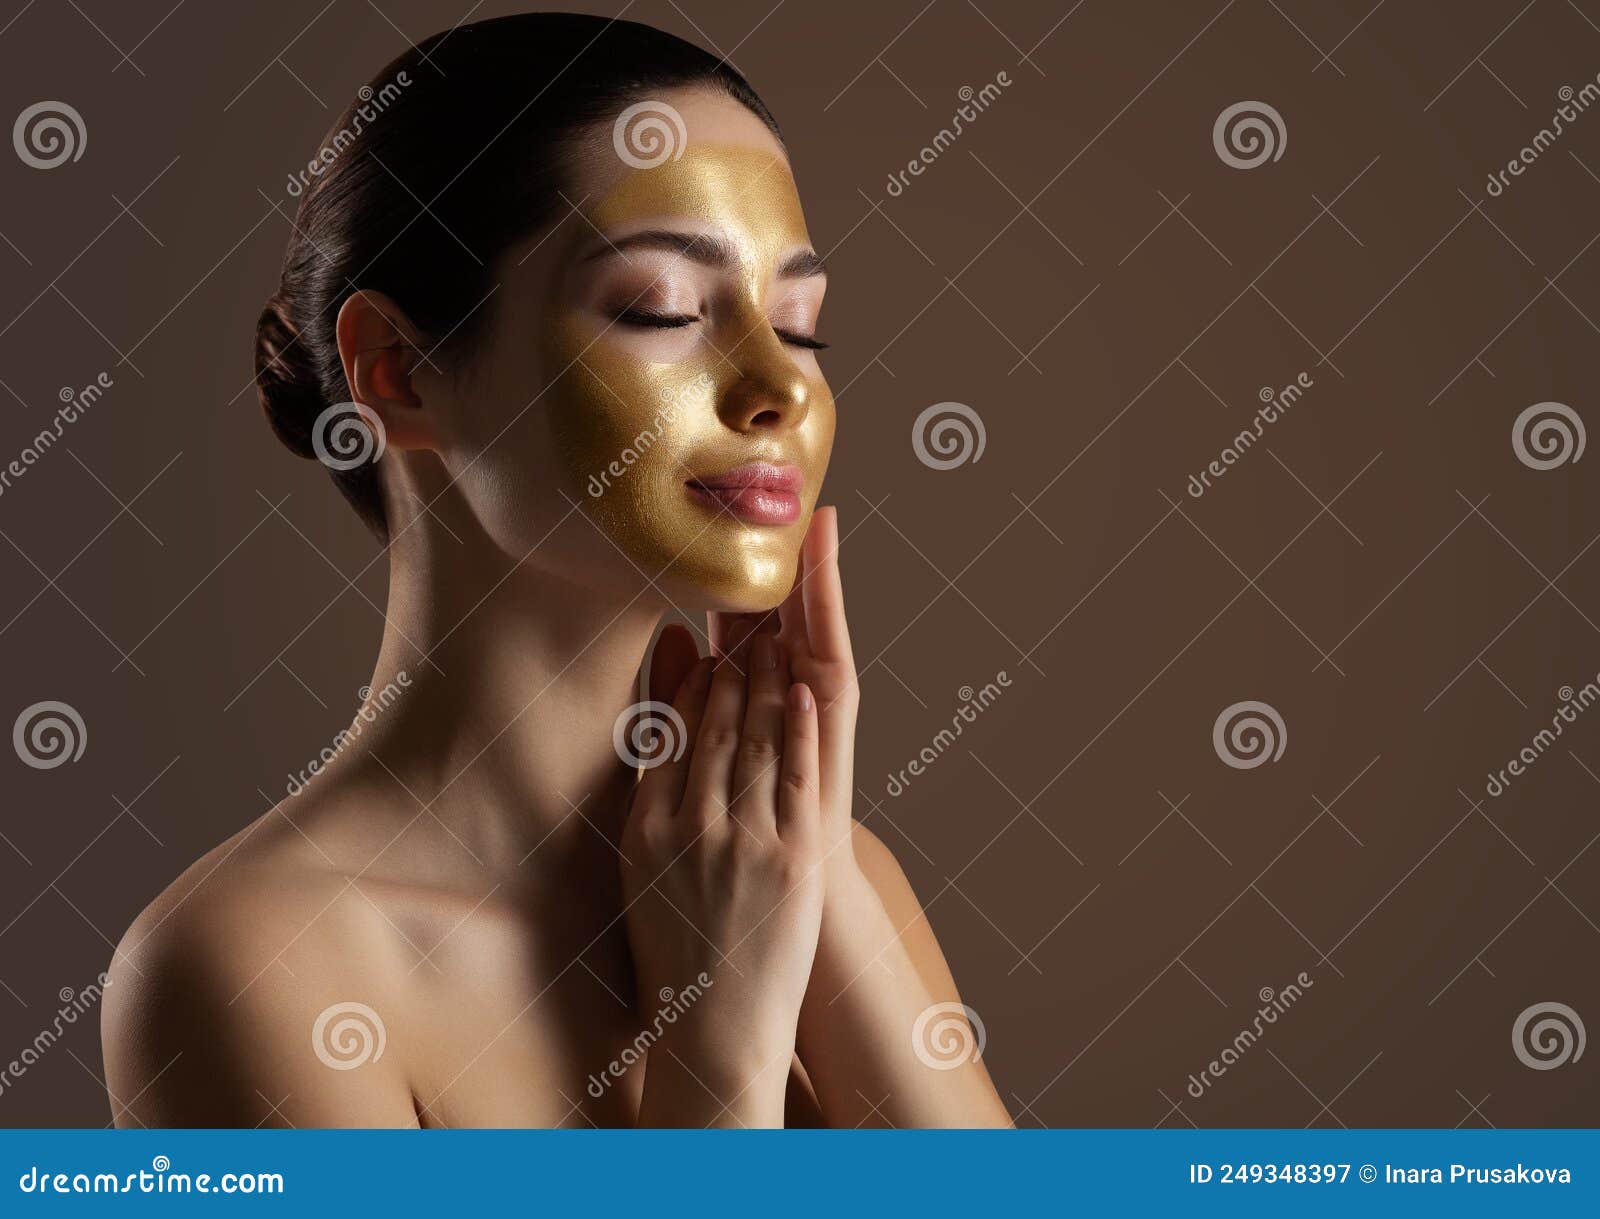 facial peeling golden mask. woman with gold lifting face mask over dark background. beauty model enjoying skin care spa